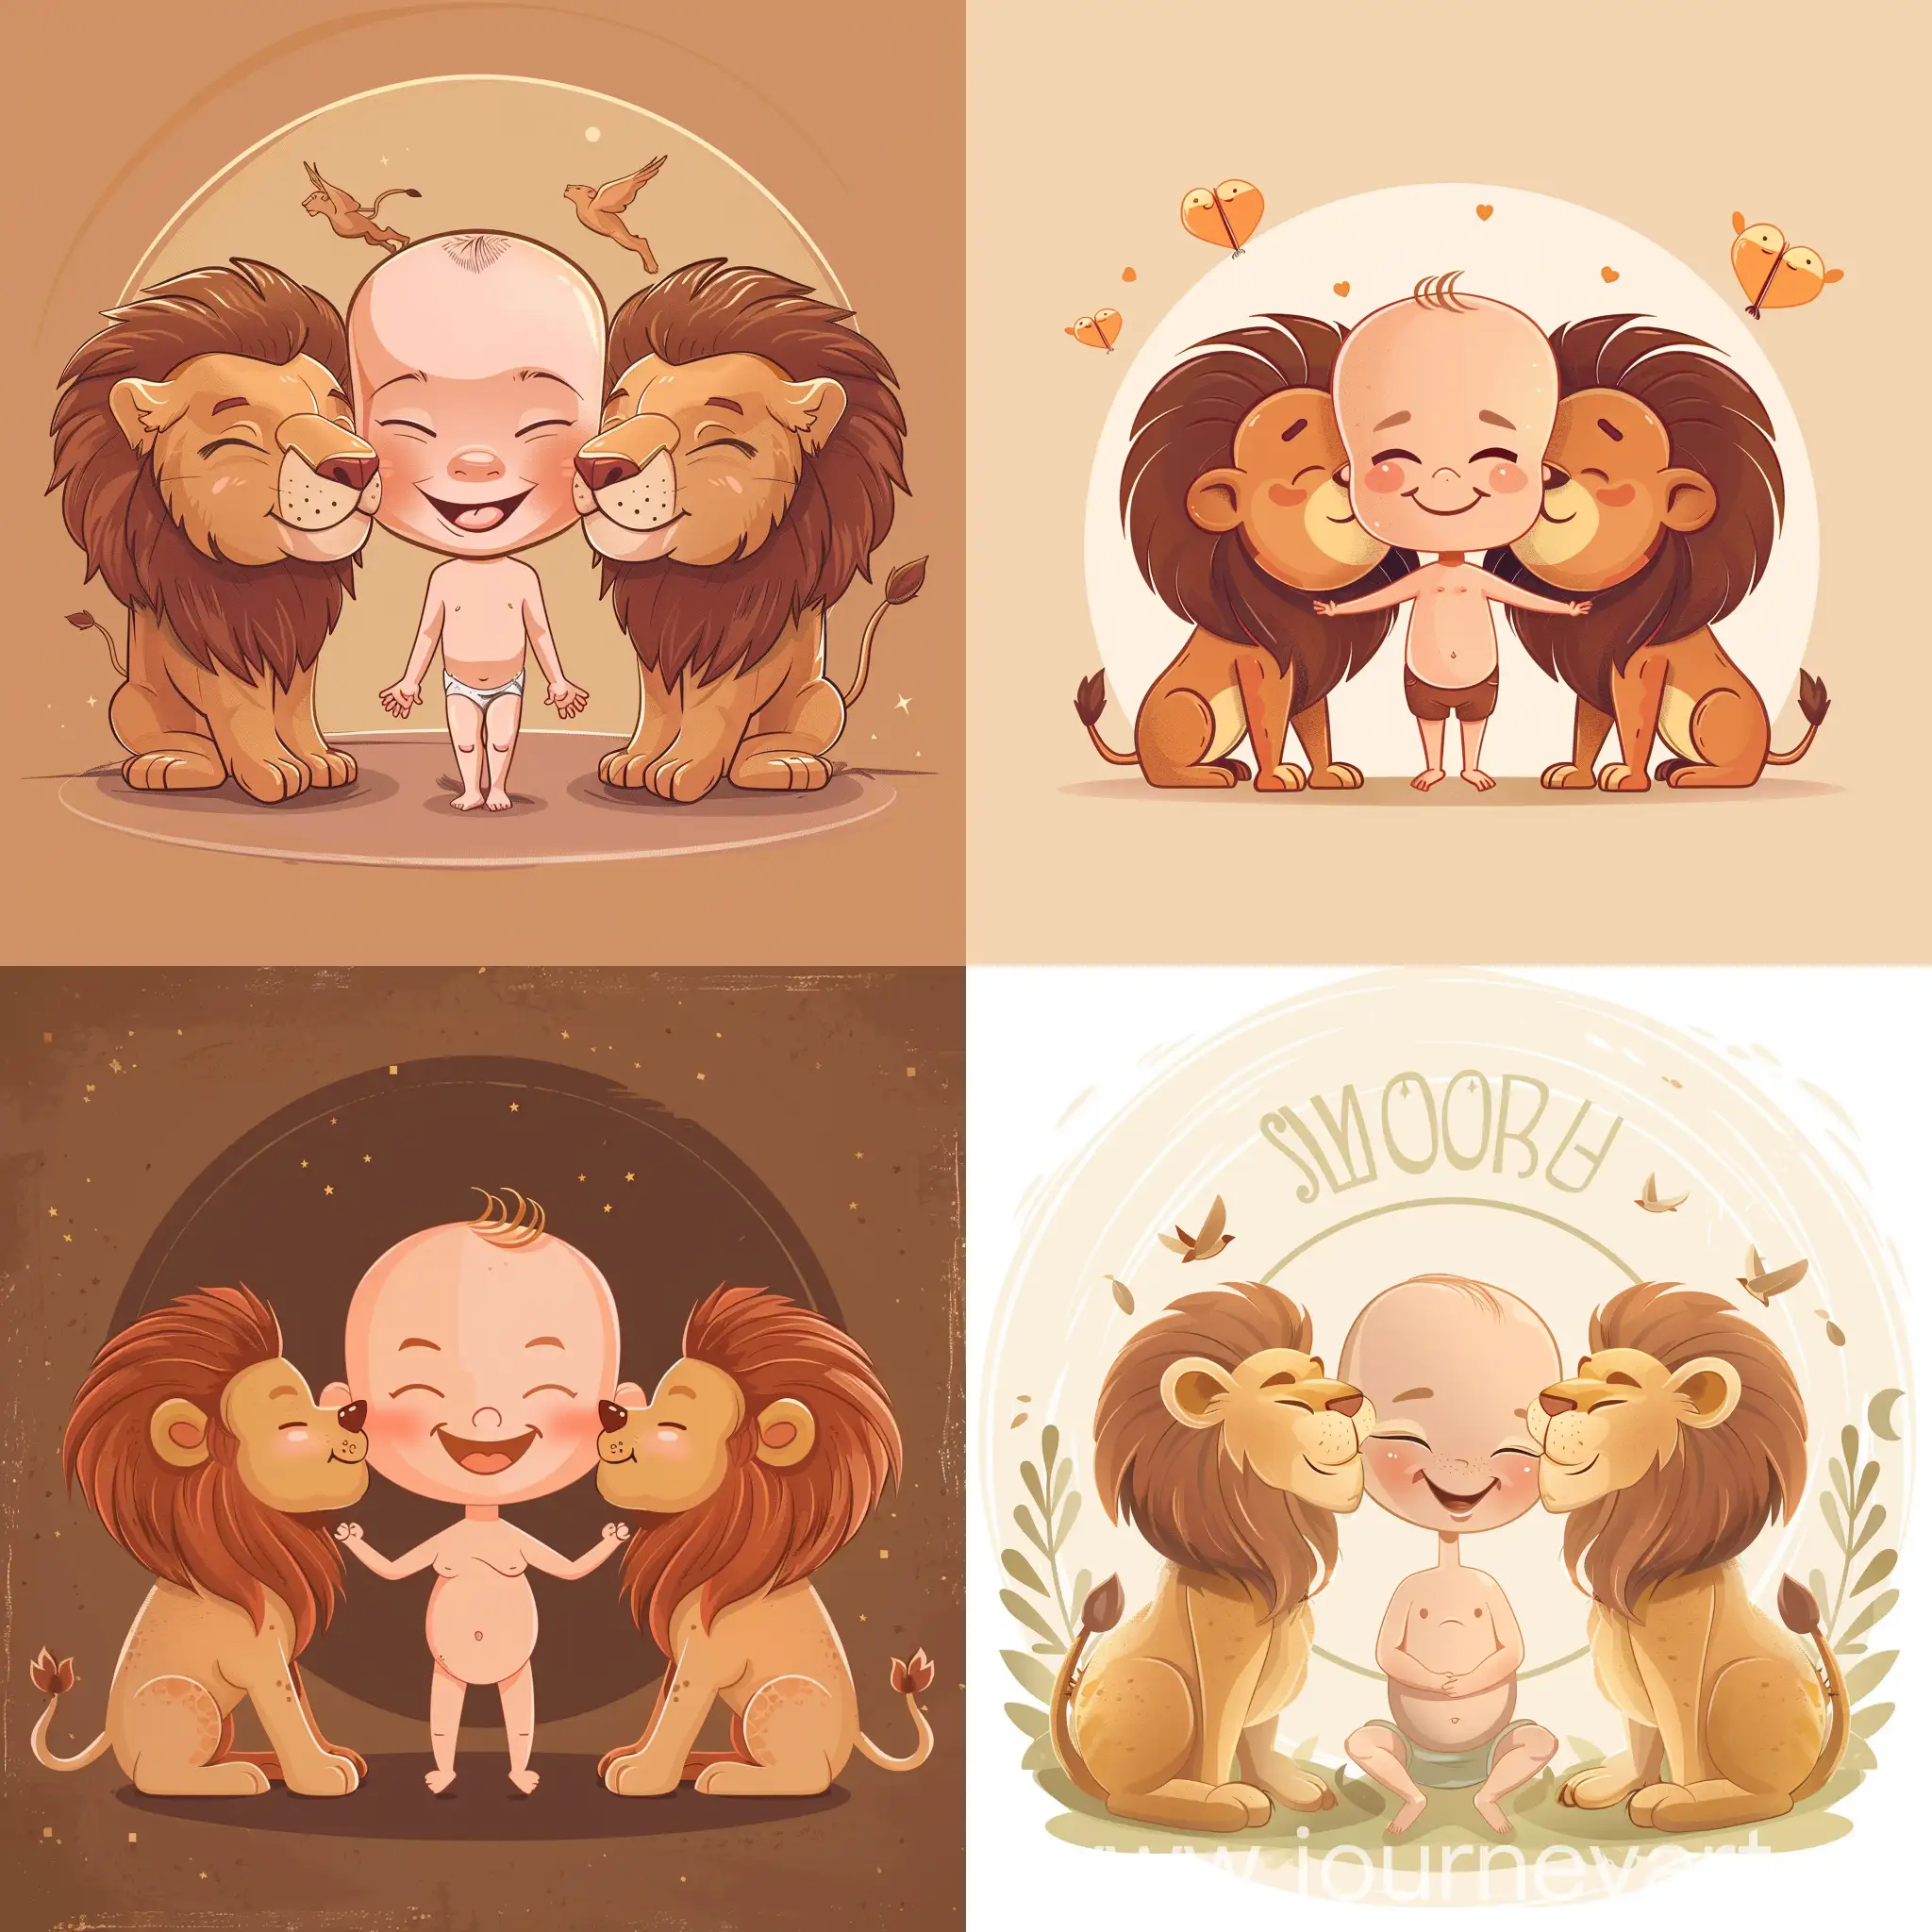 cartoon portrait of a skinny smiling BABY surrounded by two kissing Lions, high quality detailed, in cartoon flat style